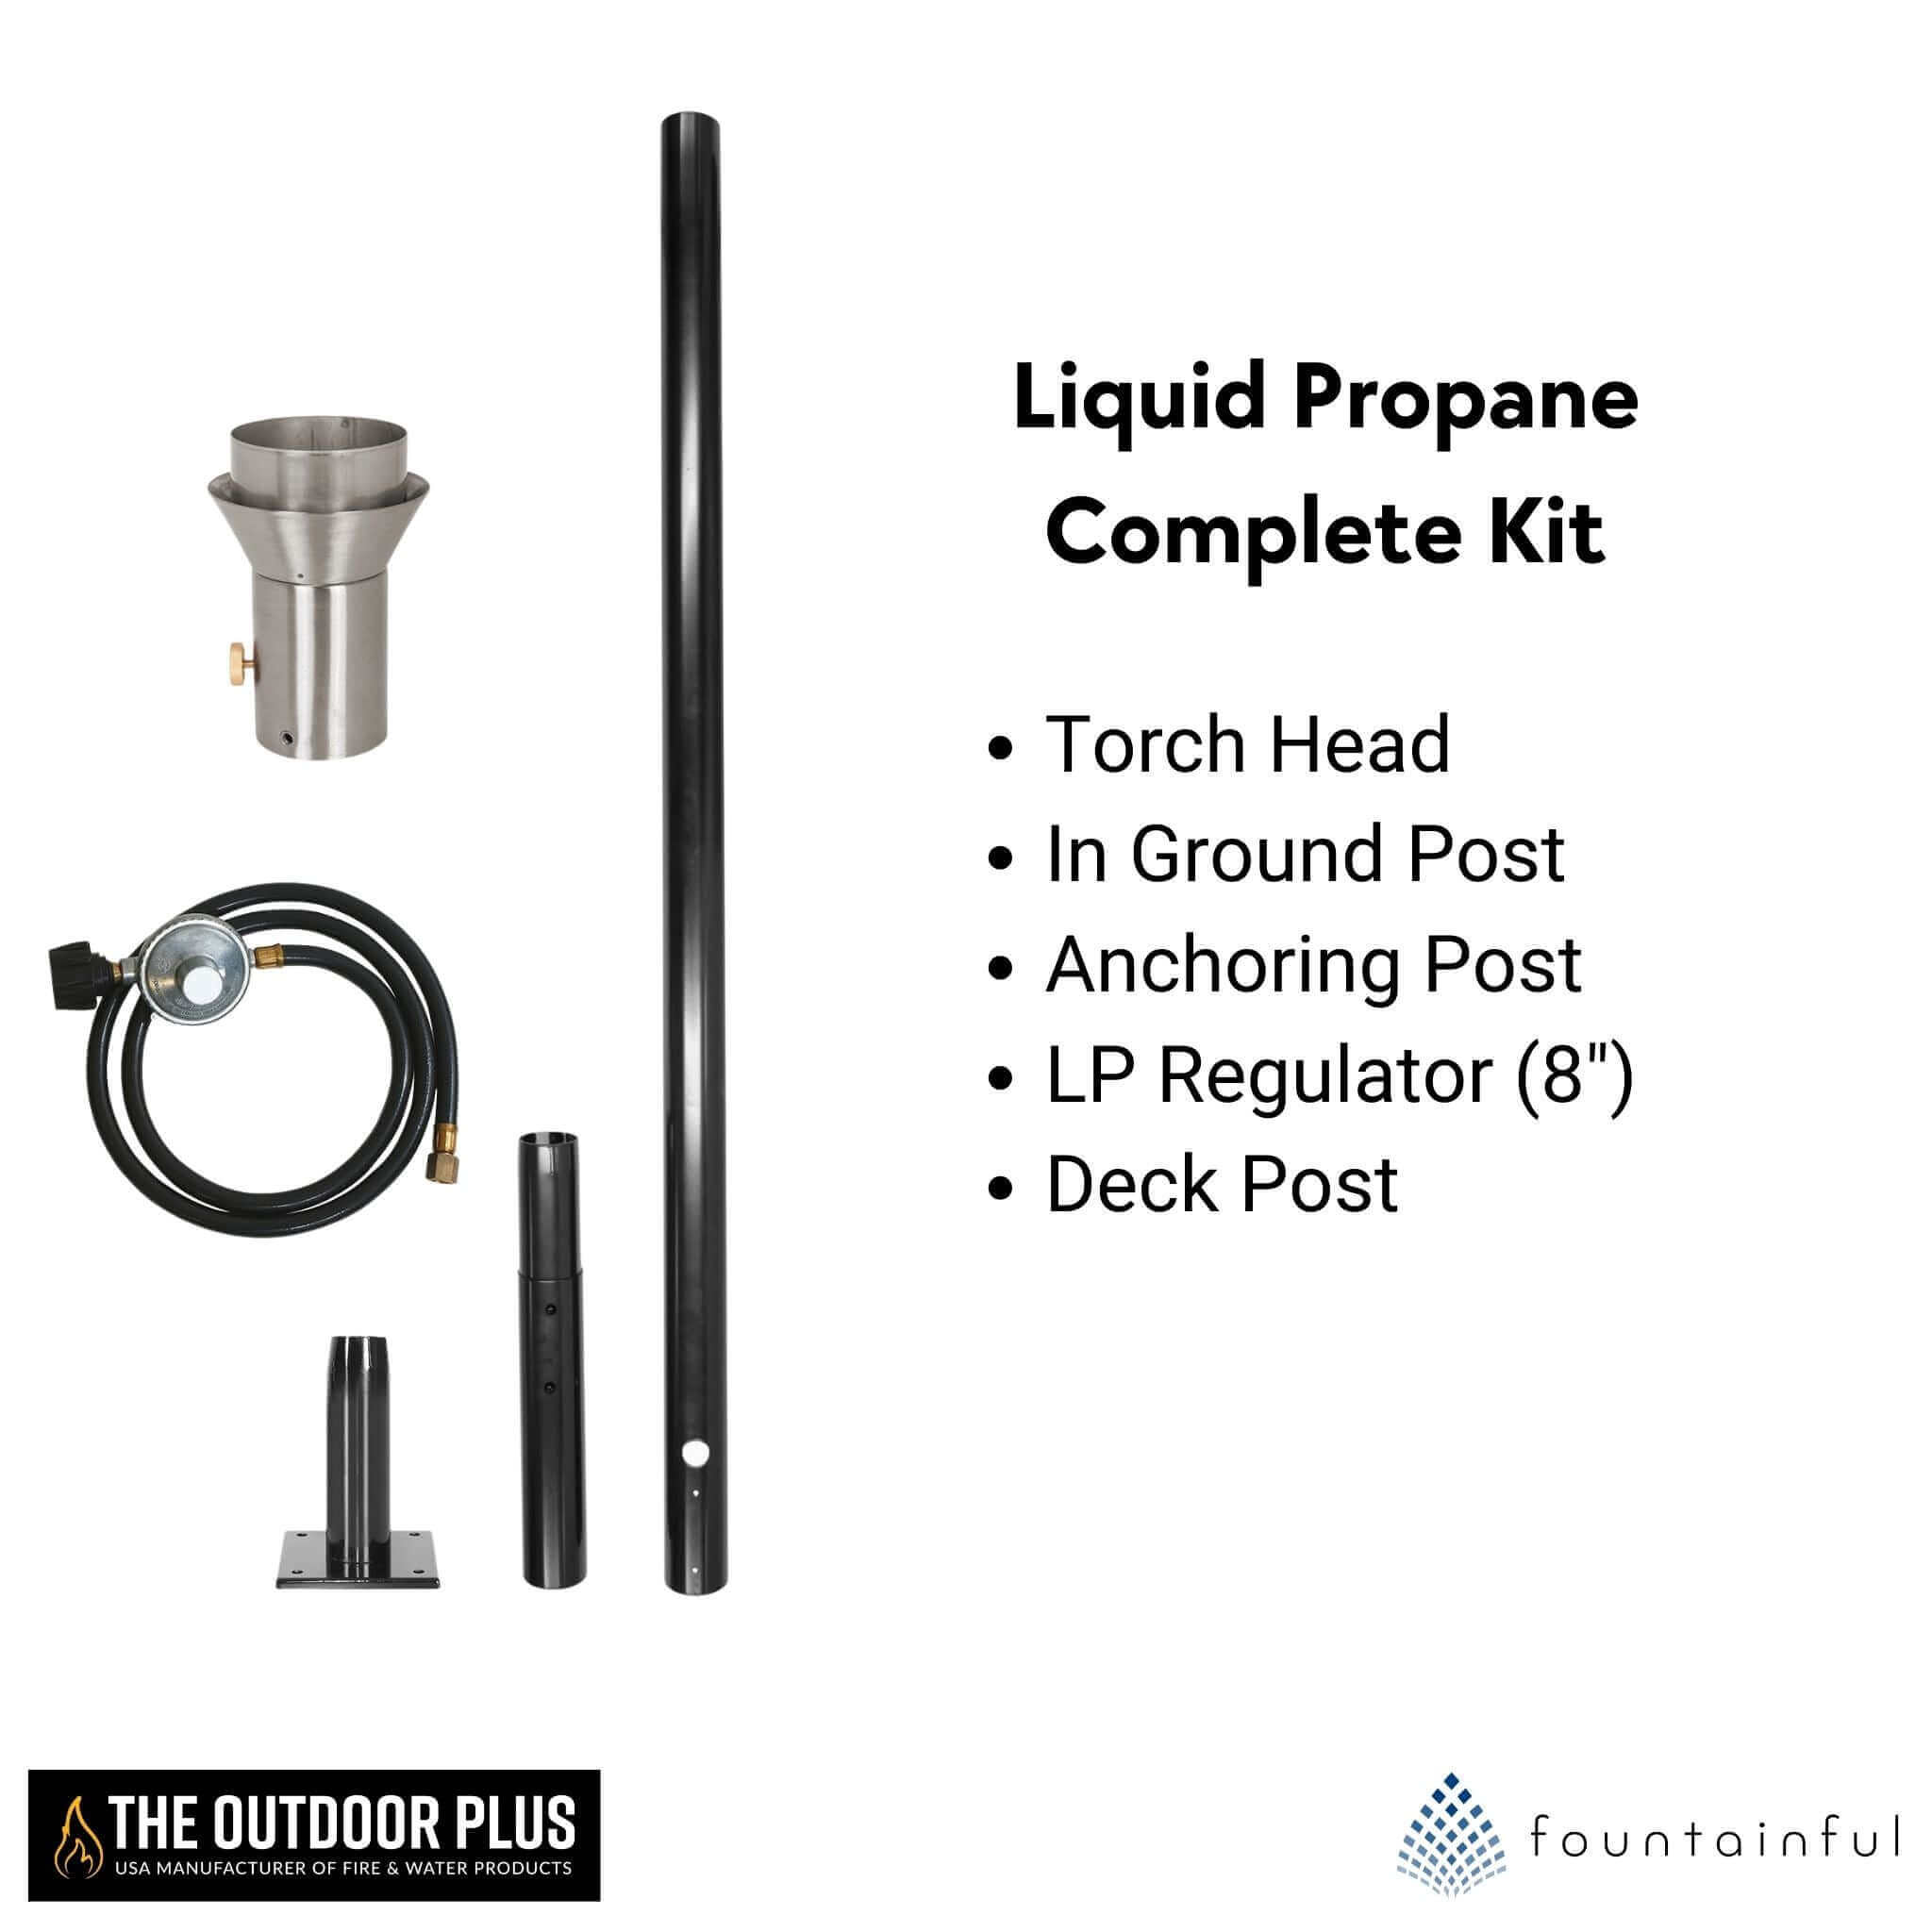 Trojan Fire Torch COMPLETE KIT - Stainless Steel - The Outdoor Plus